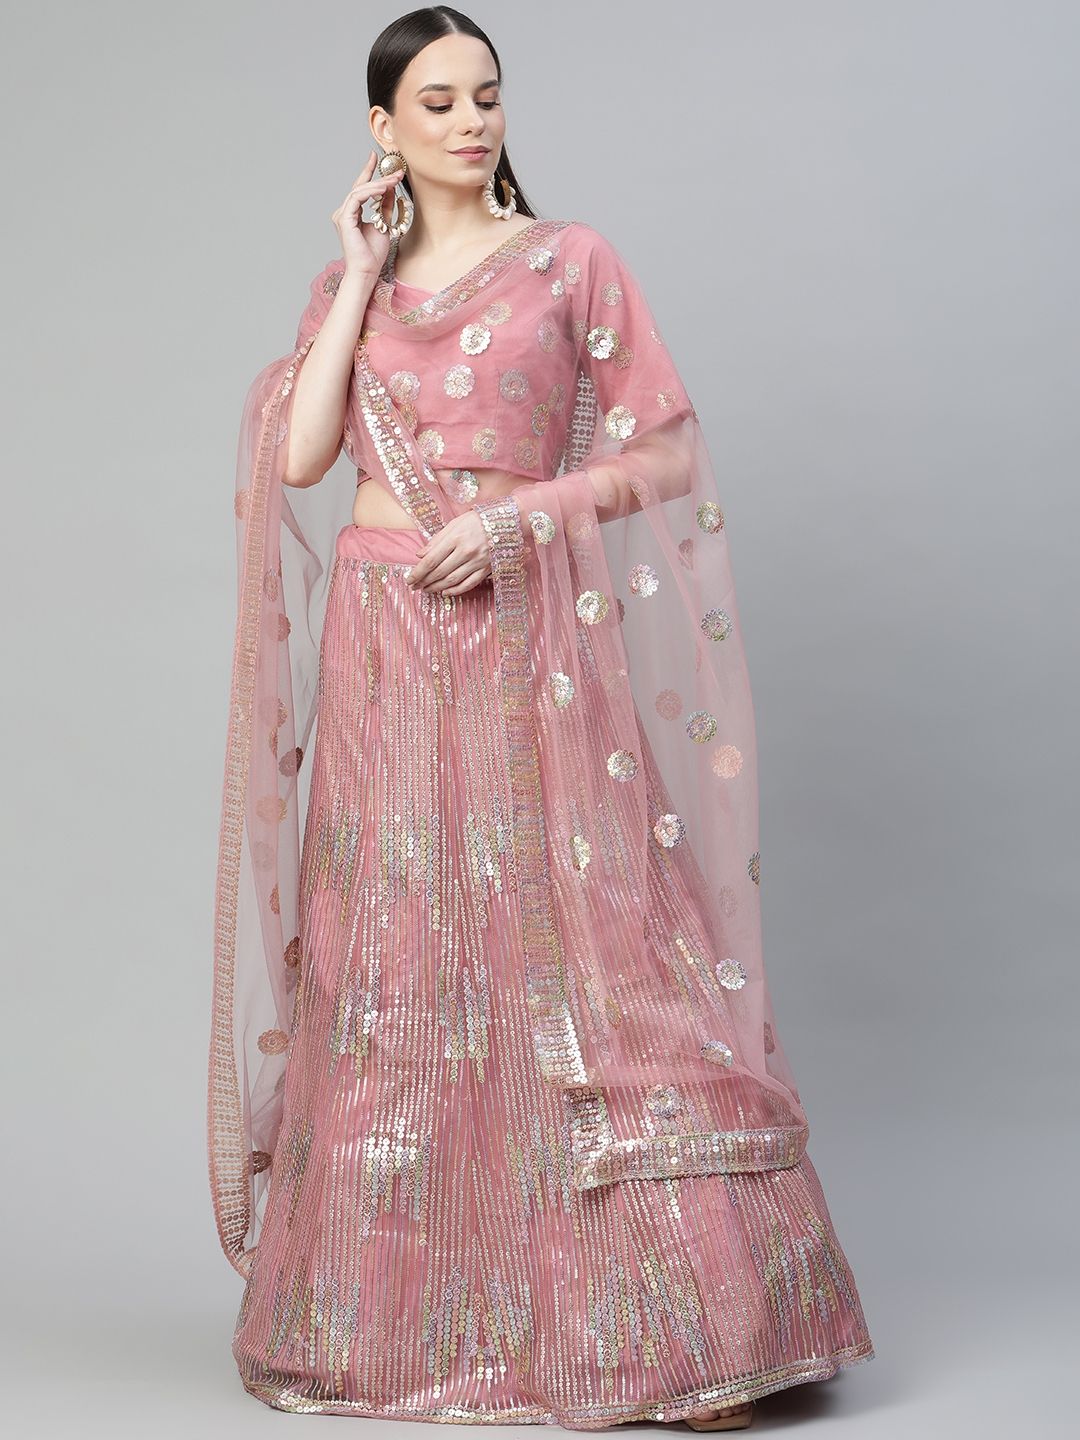 Readiprint Fashions Pink Embellished Sequinned Semi-Stitched Lehenga & Unstitched Blouse With Dupatta Price in India